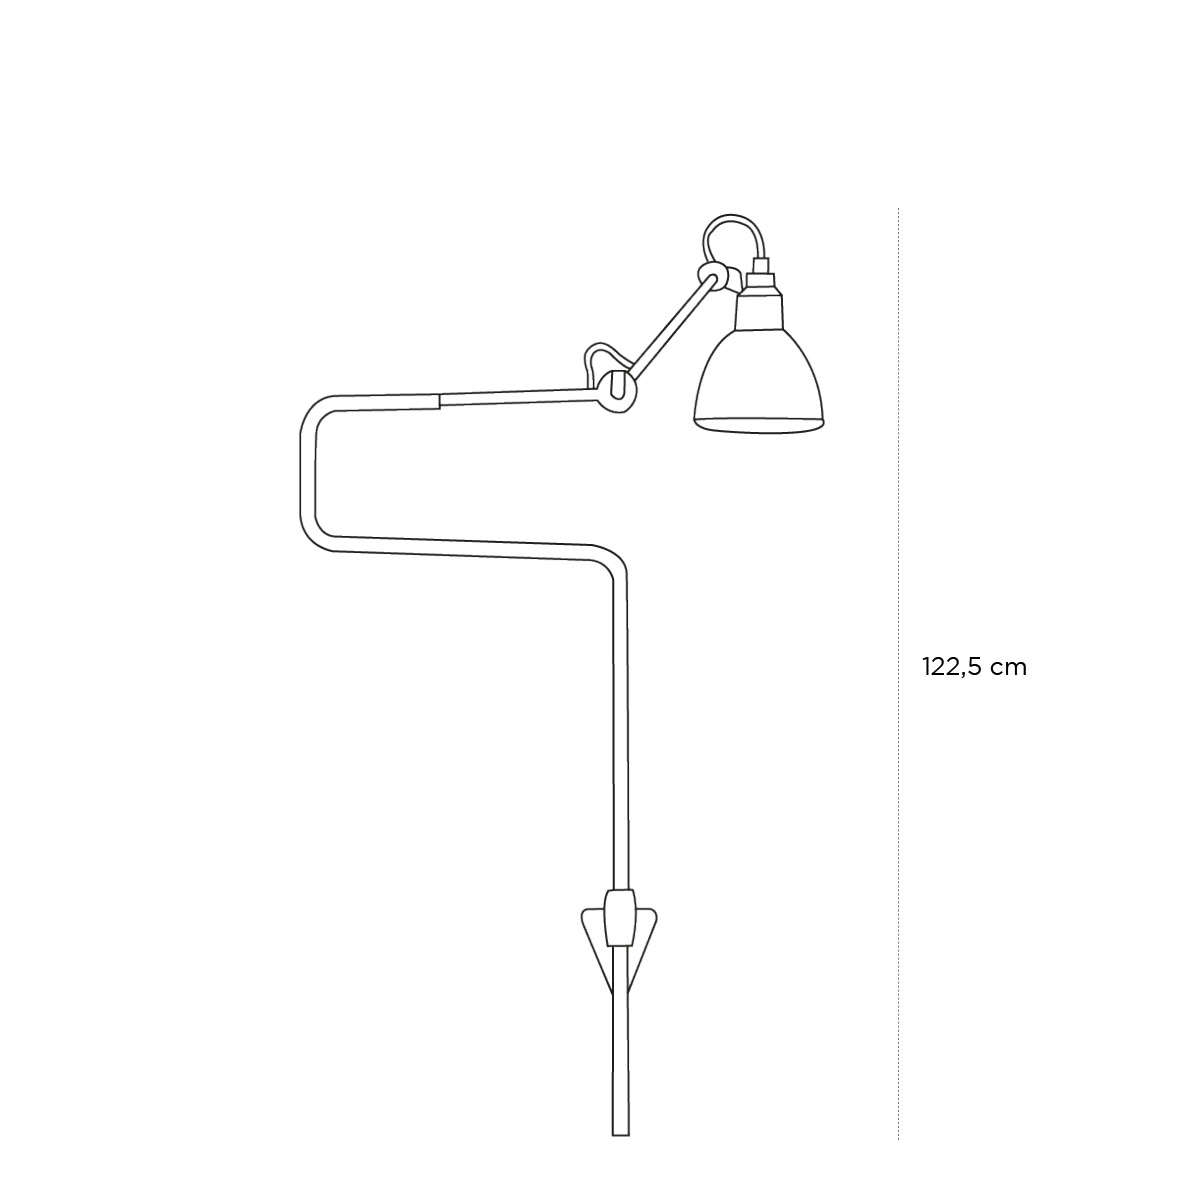 Product schematic Lampe Gras N°217